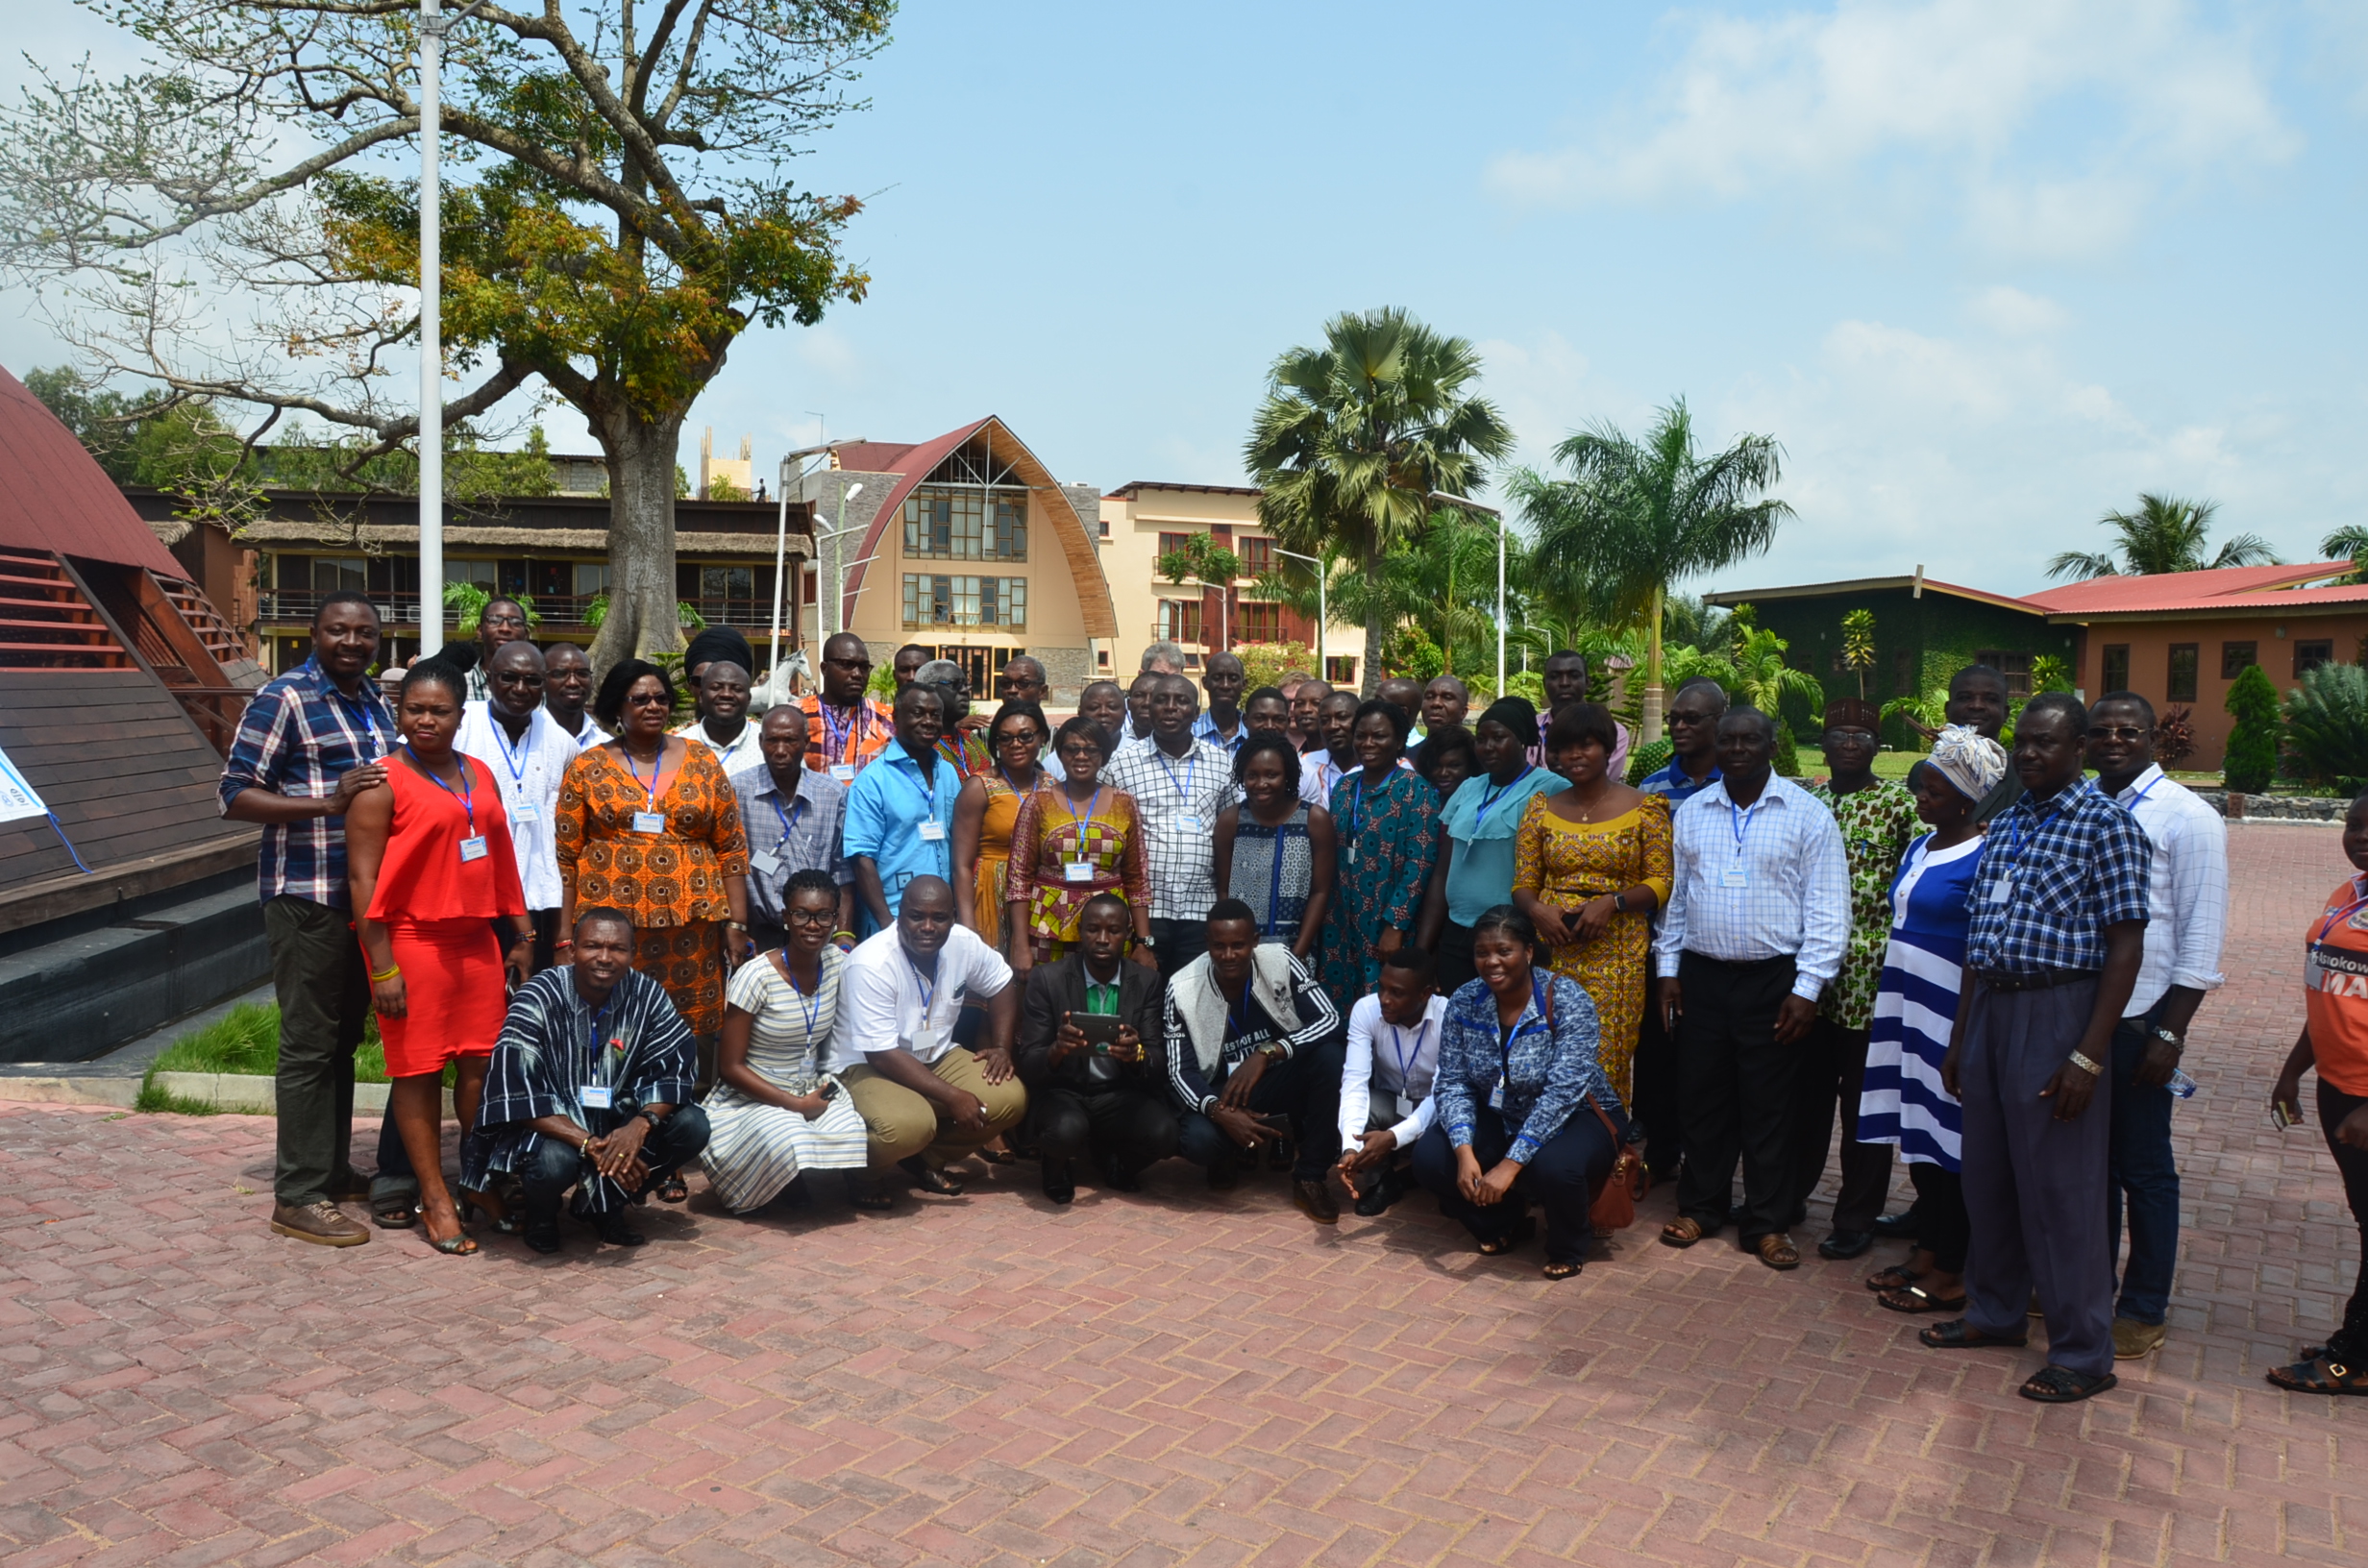 Participants of the Mole Conference